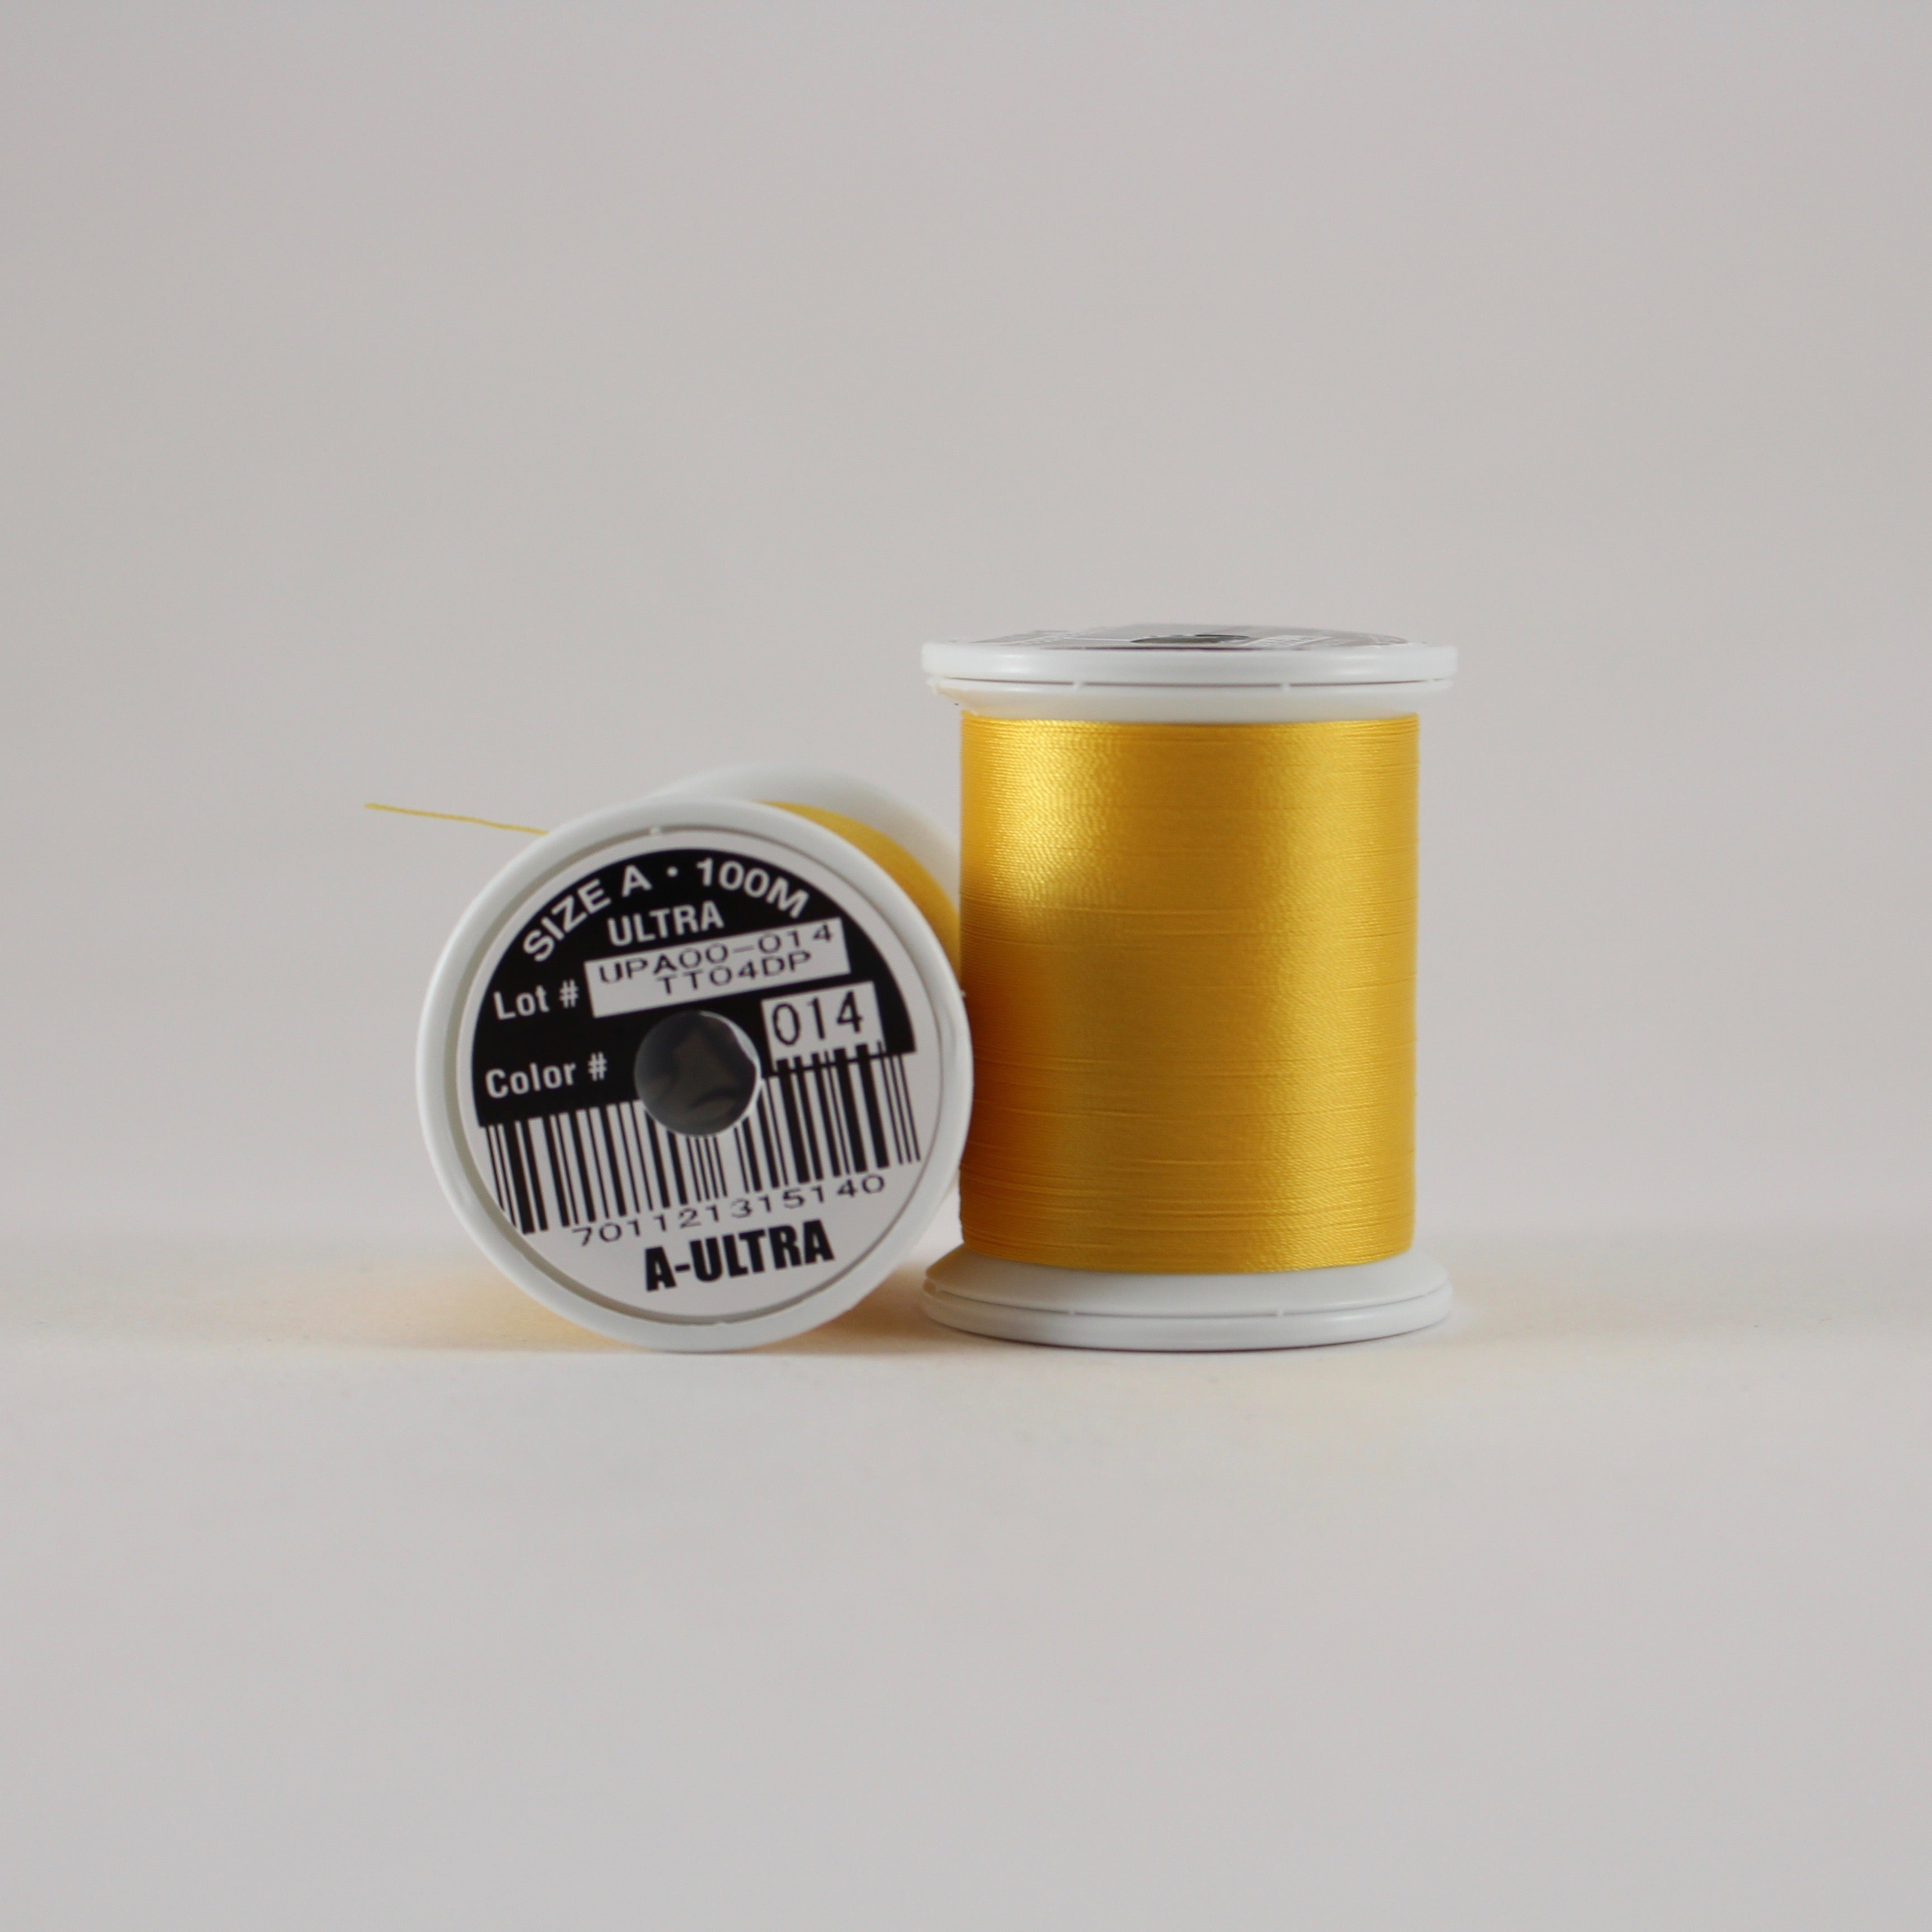 Fuji Ultra Poly rod wrapping thread in Goldenrod #014 (Size A 100m